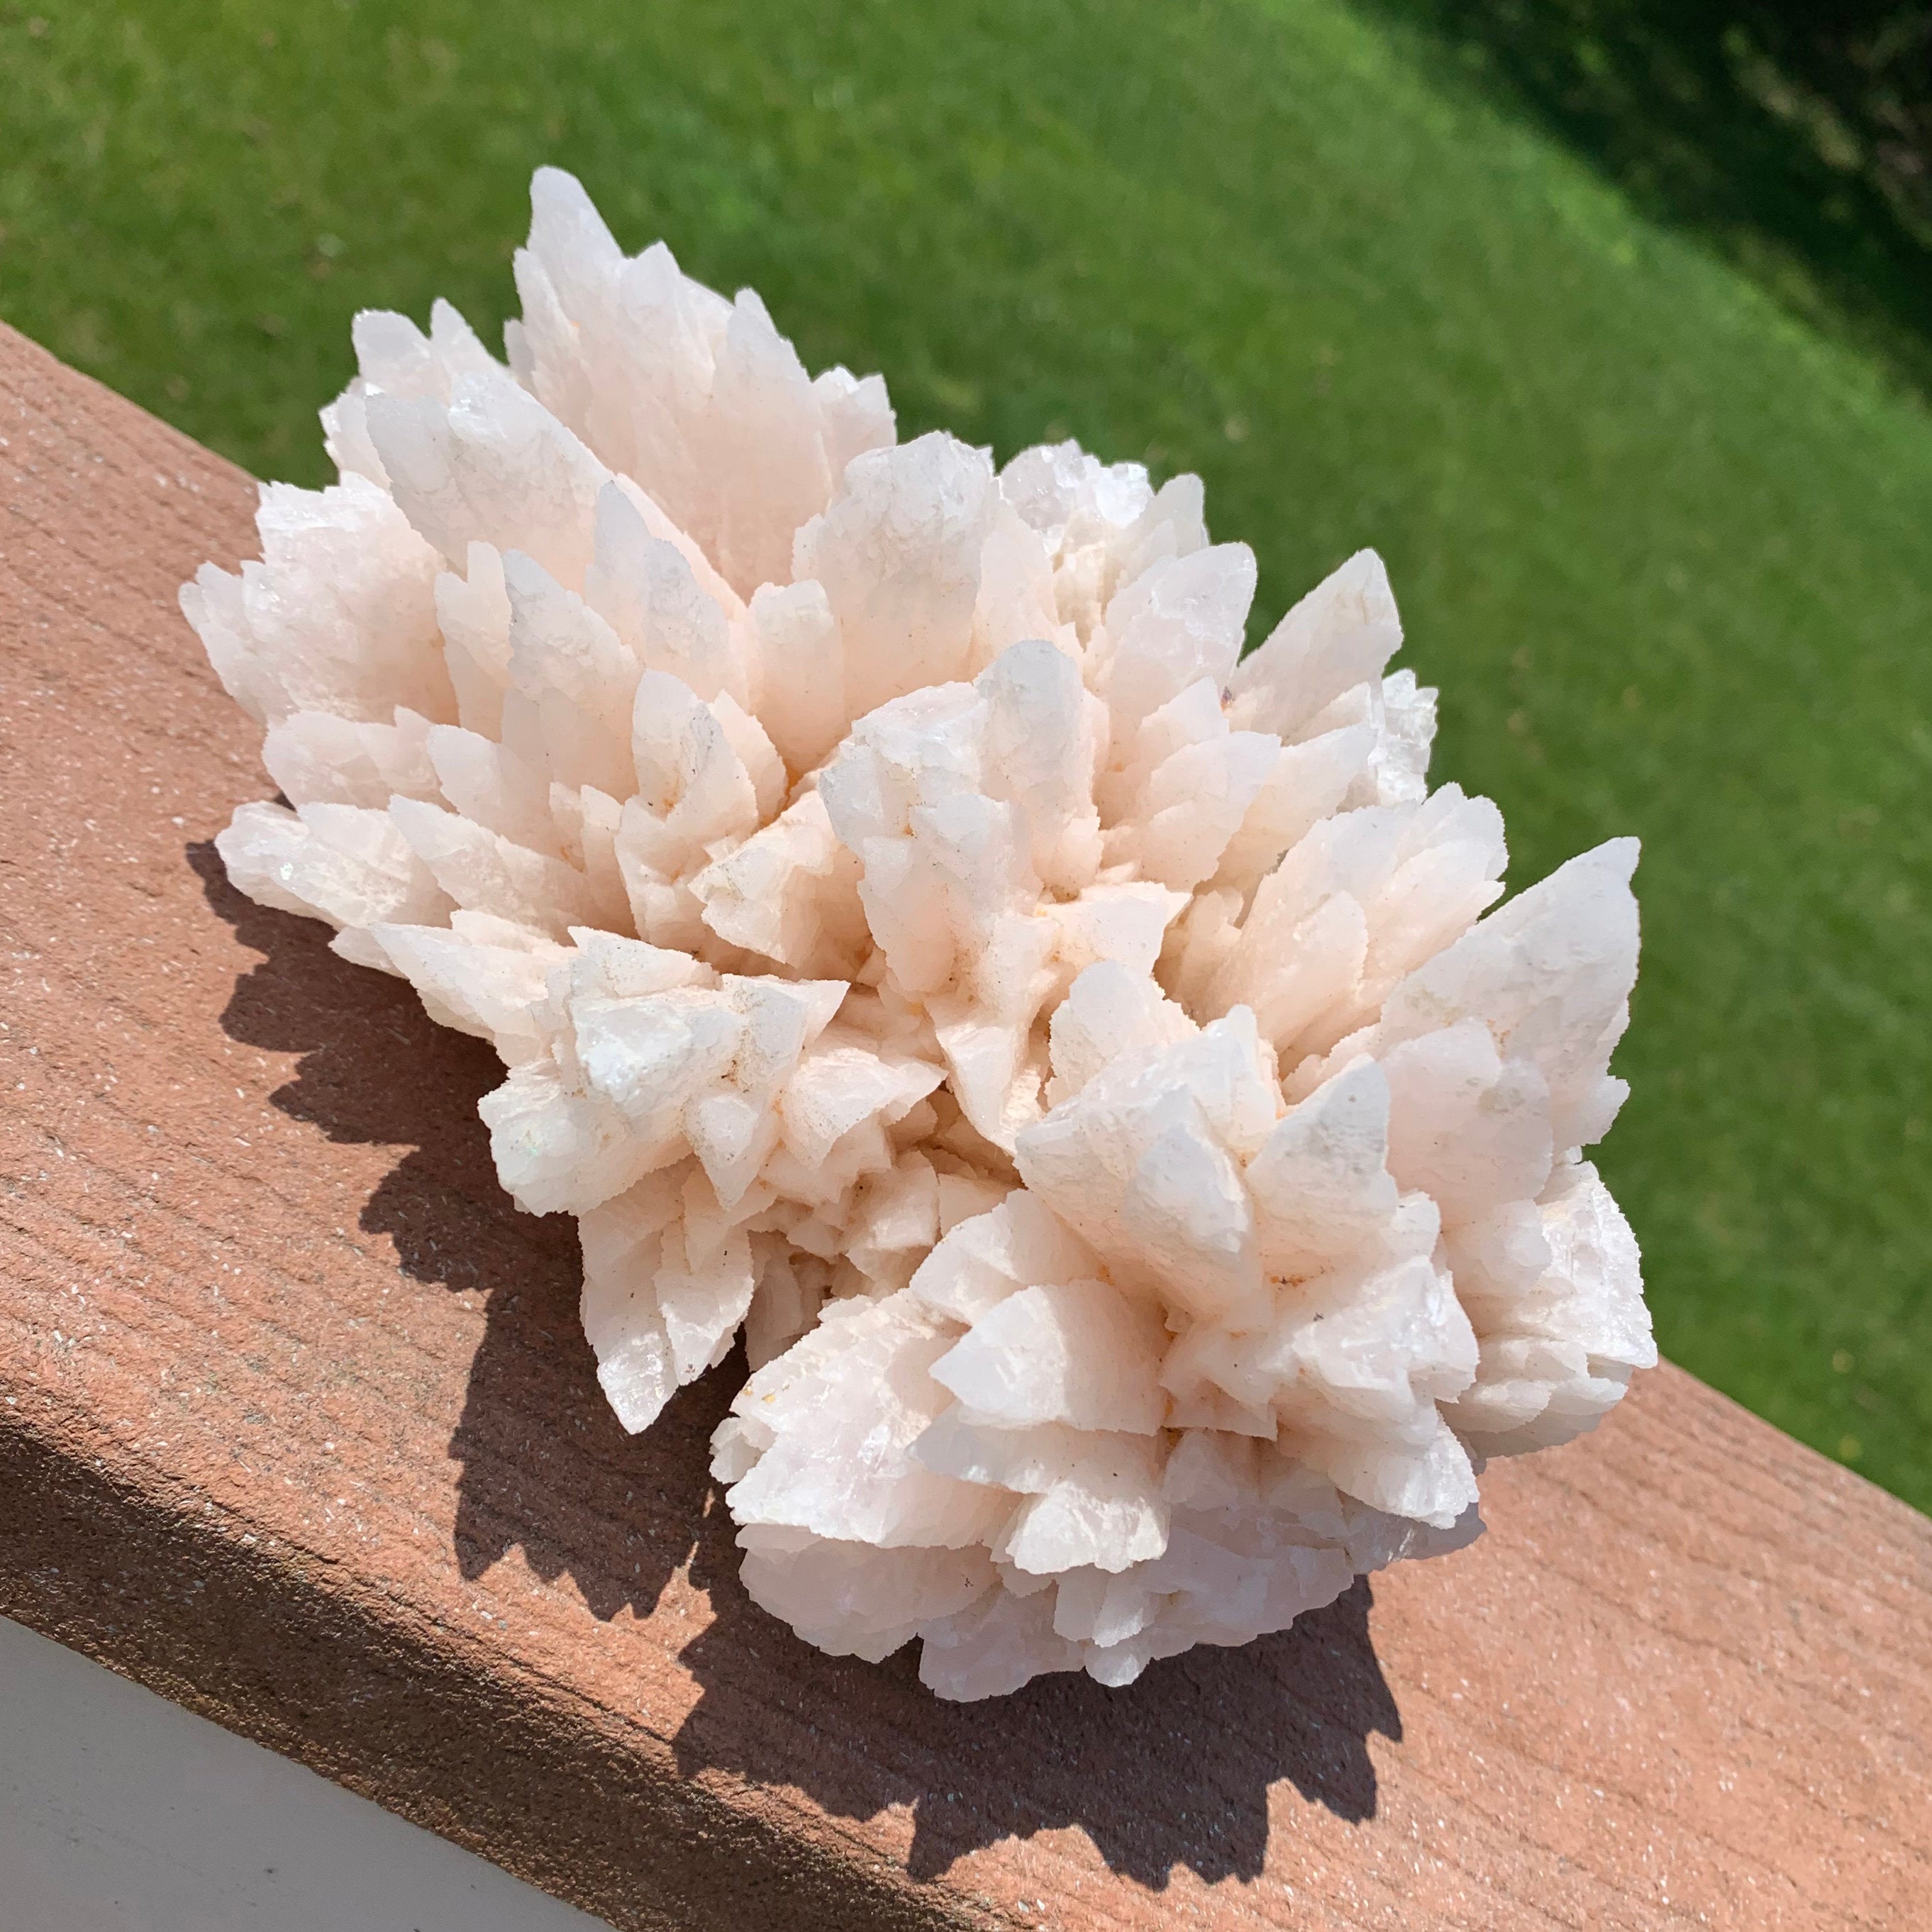 Large Manganoan Calcite Crystal - Raw Mineral Specimen - Natural Stone - Collectible Manganocalcite - Healing Crystal - Meditation Stone 4lb